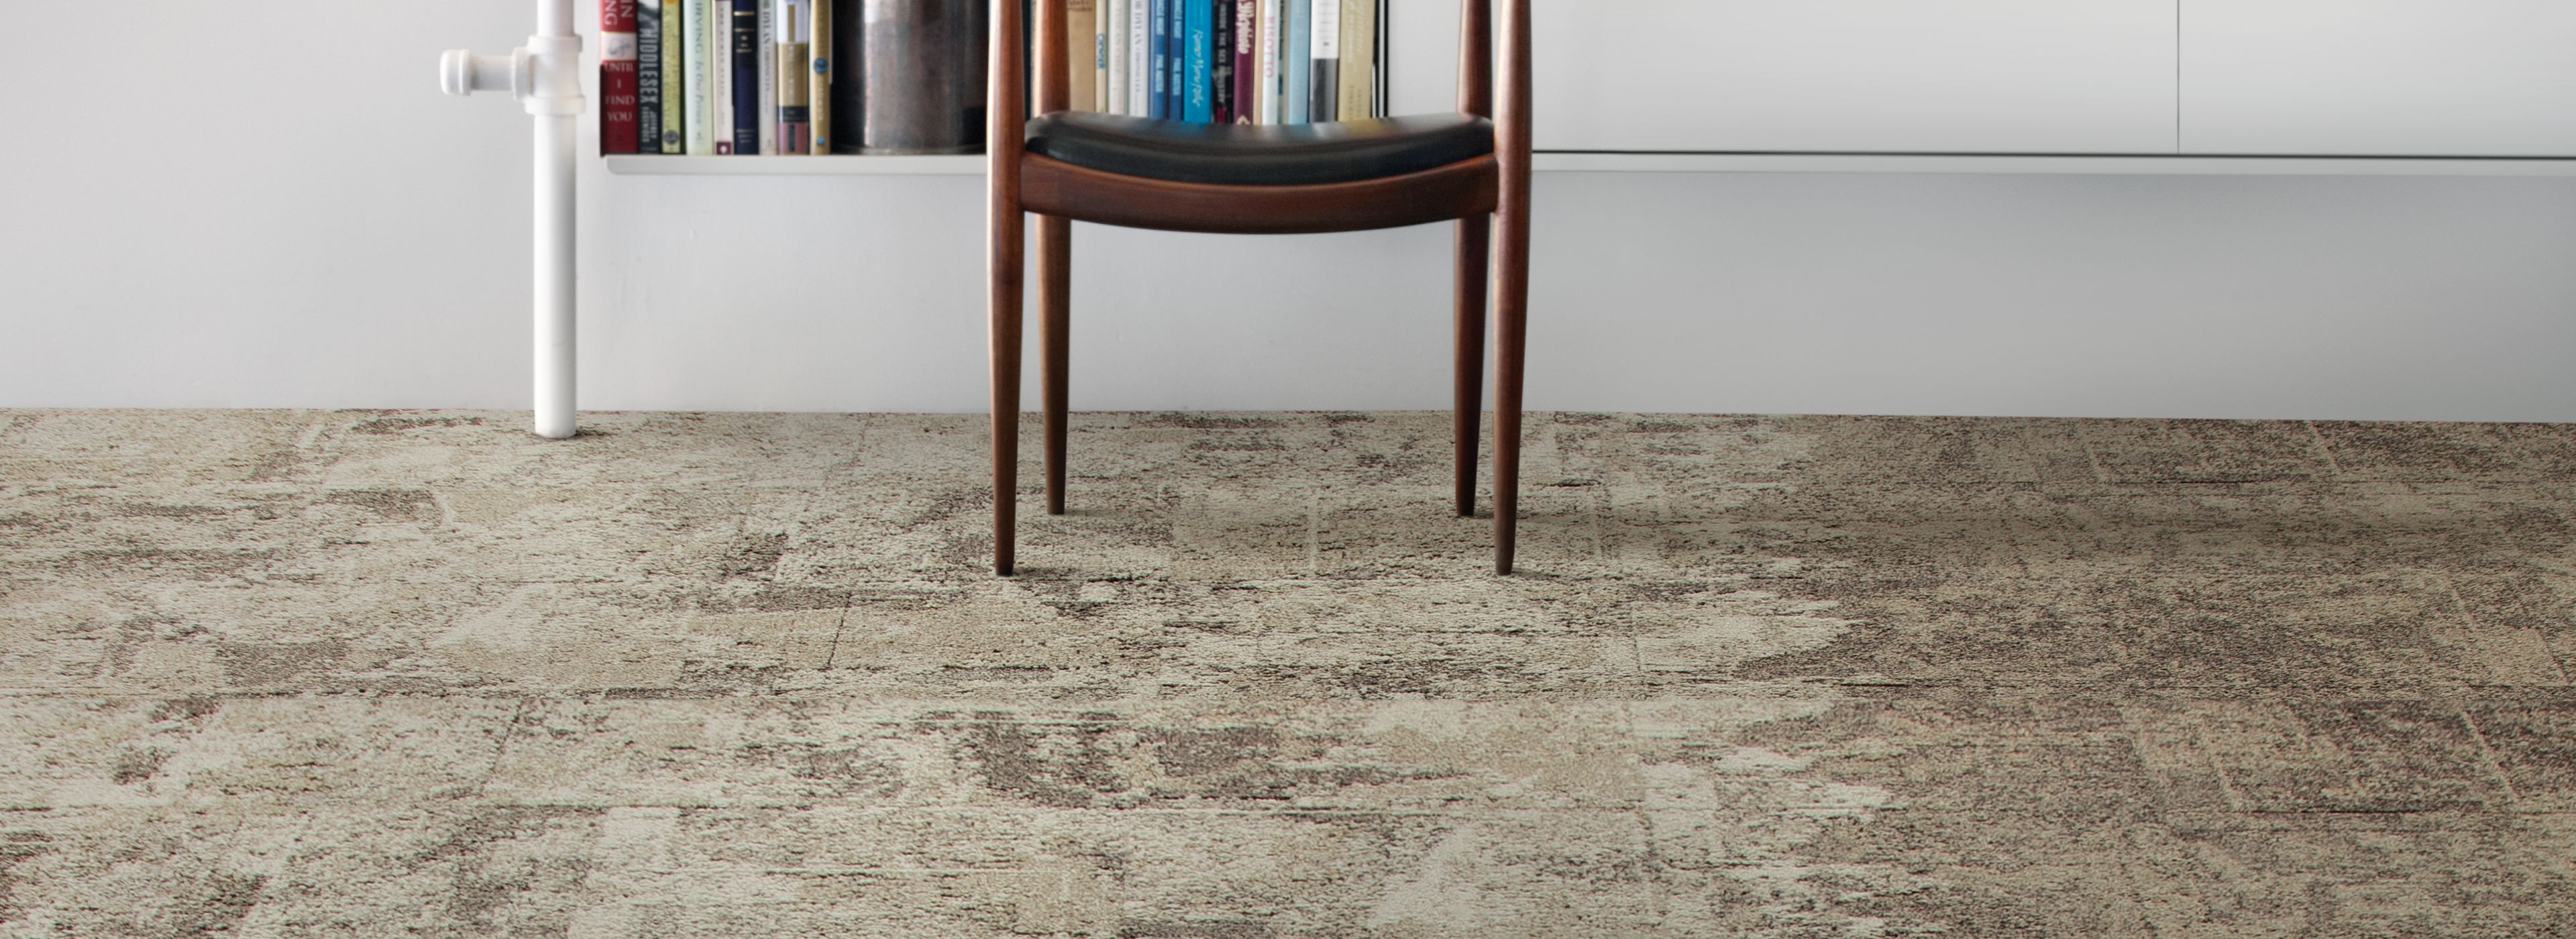 image Interface B601, B602 and B603 carpet tile in library with wooden chair numéro 1